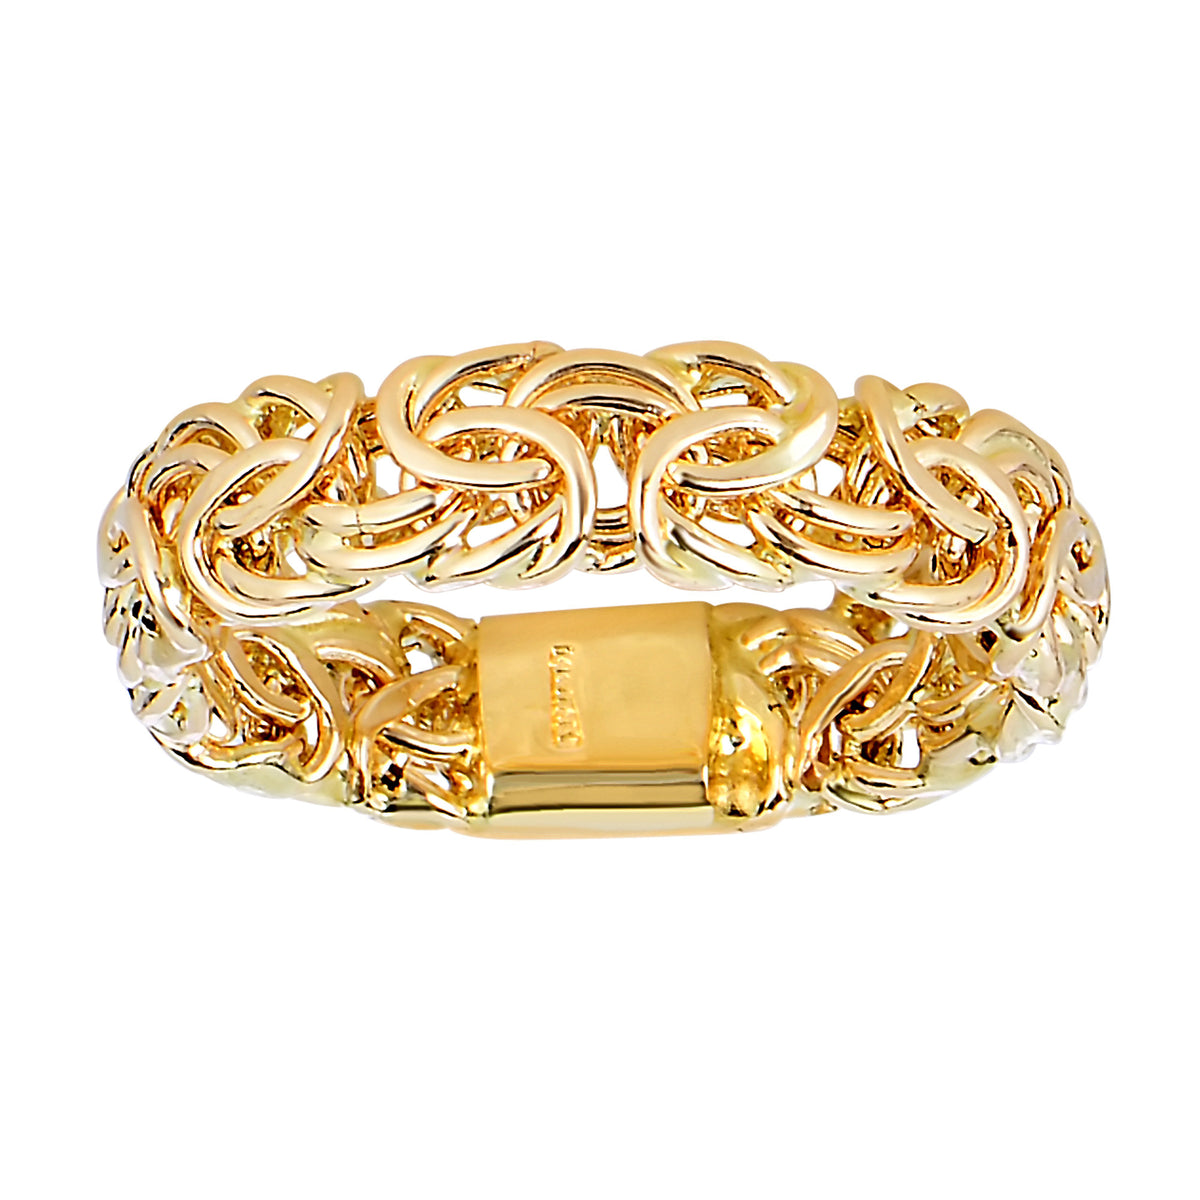 14Kt Yellow Gold Byzantine Style Band - 4mm Wide fine designer jewelry for men and women